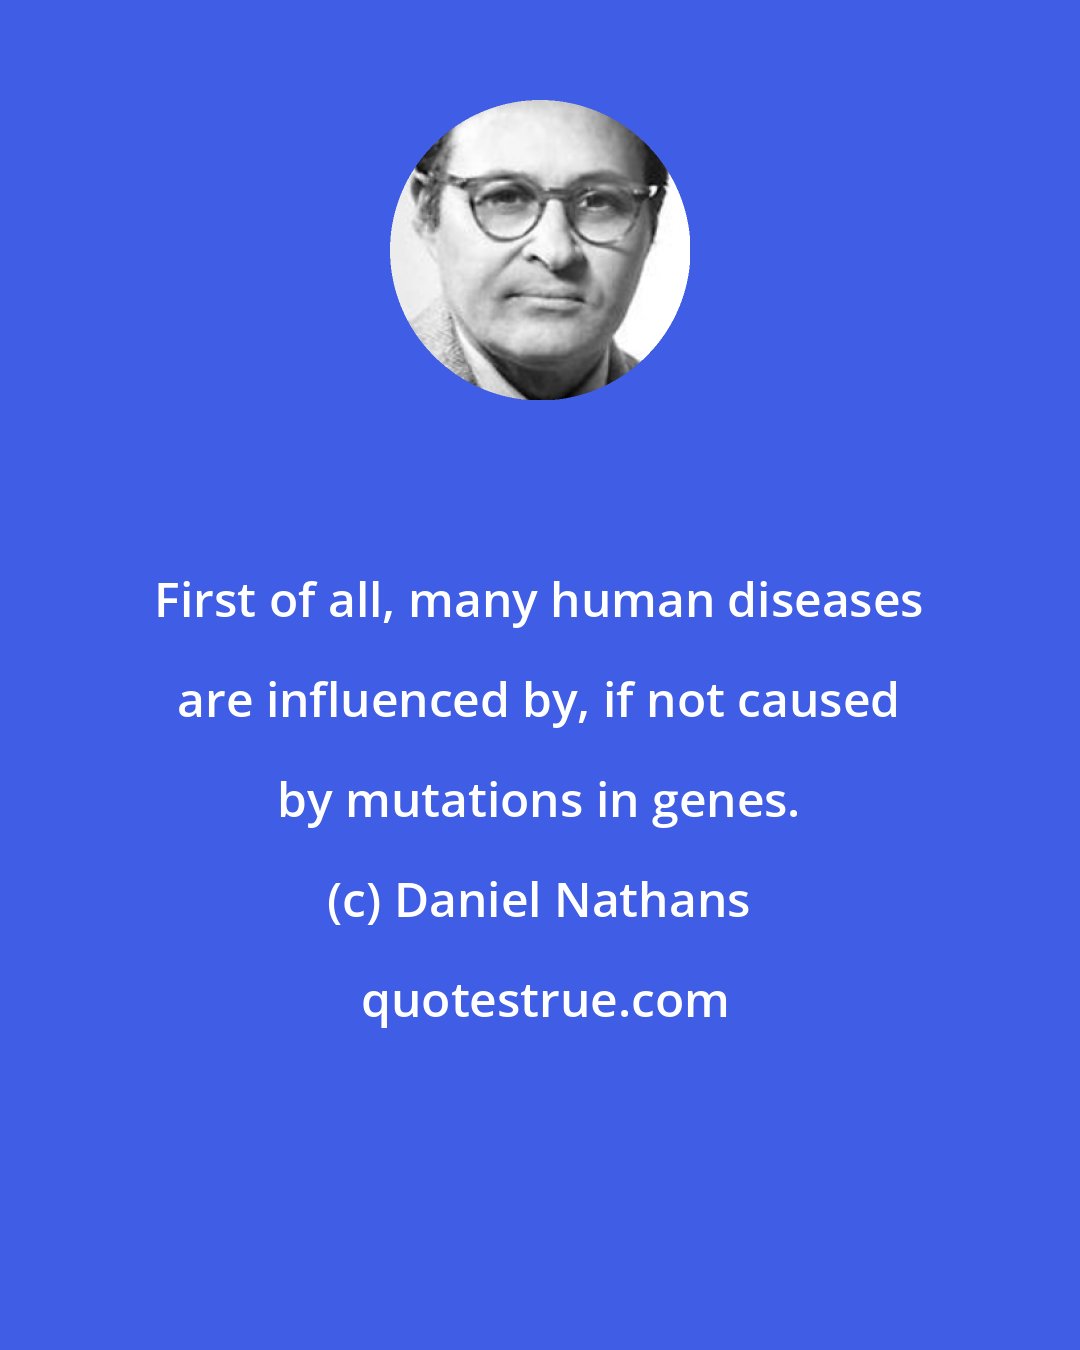 Daniel Nathans: First of all, many human diseases are influenced by, if not caused by mutations in genes.